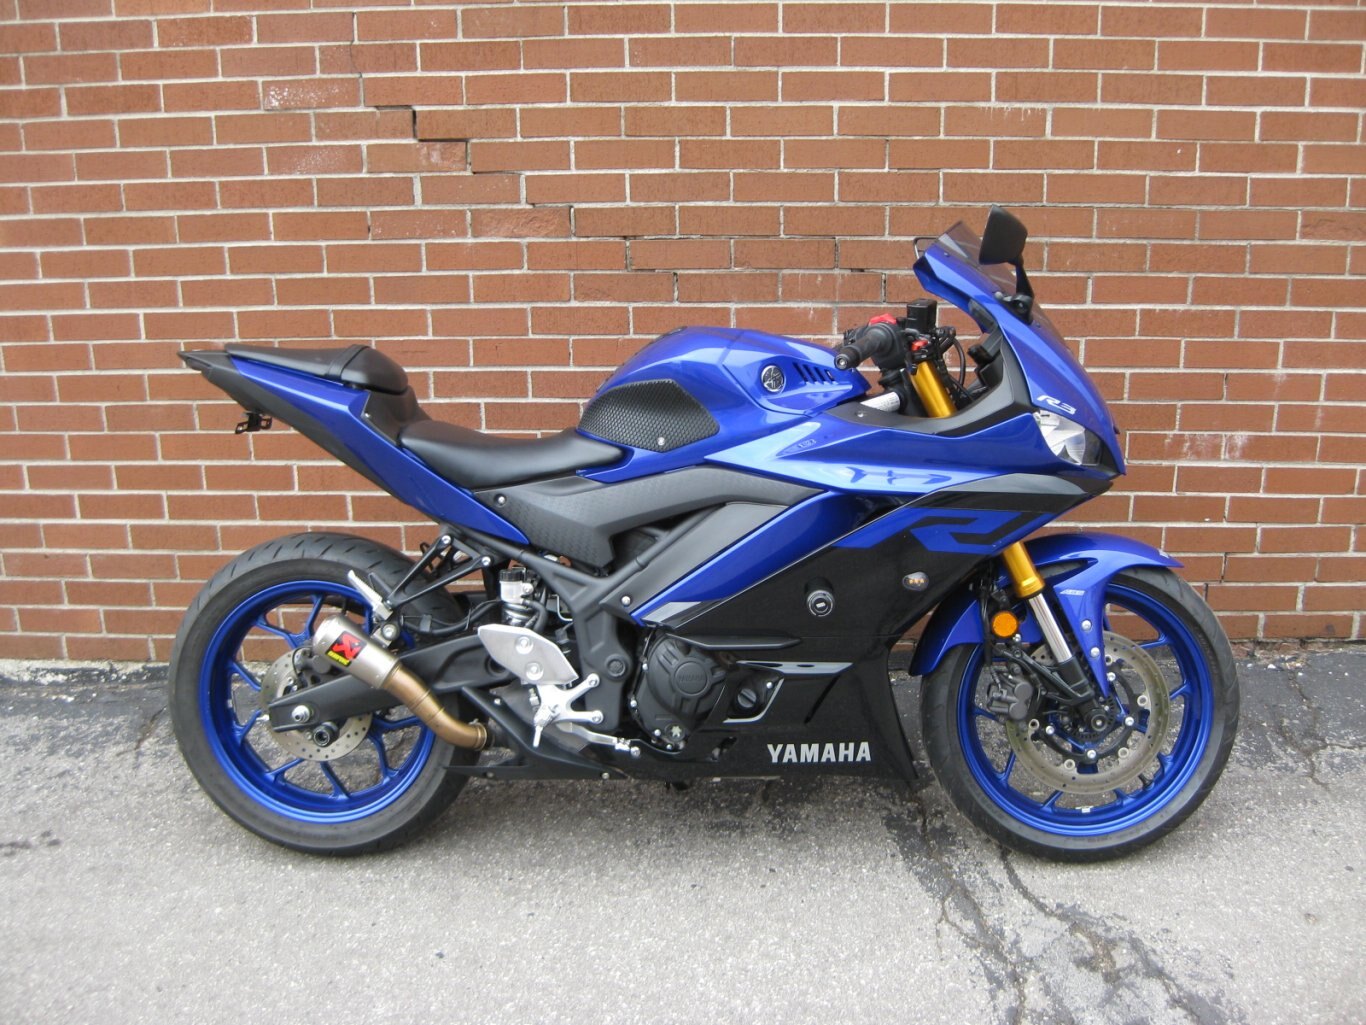 2019 Yamaha YZF-R3 - SOLD AND CONGRATULATIONS TO SIR DEON “THE NEW ROAD WARRIOR” !! WELCOME TO THE COMMUNITY OF MOTORCYCLING ON THIS SPORT STYLE - TWO WHEEL FREEDOM MACHINE –  WITH THANKS FROM GARY & TEAM CYCLE WORLD!!!!